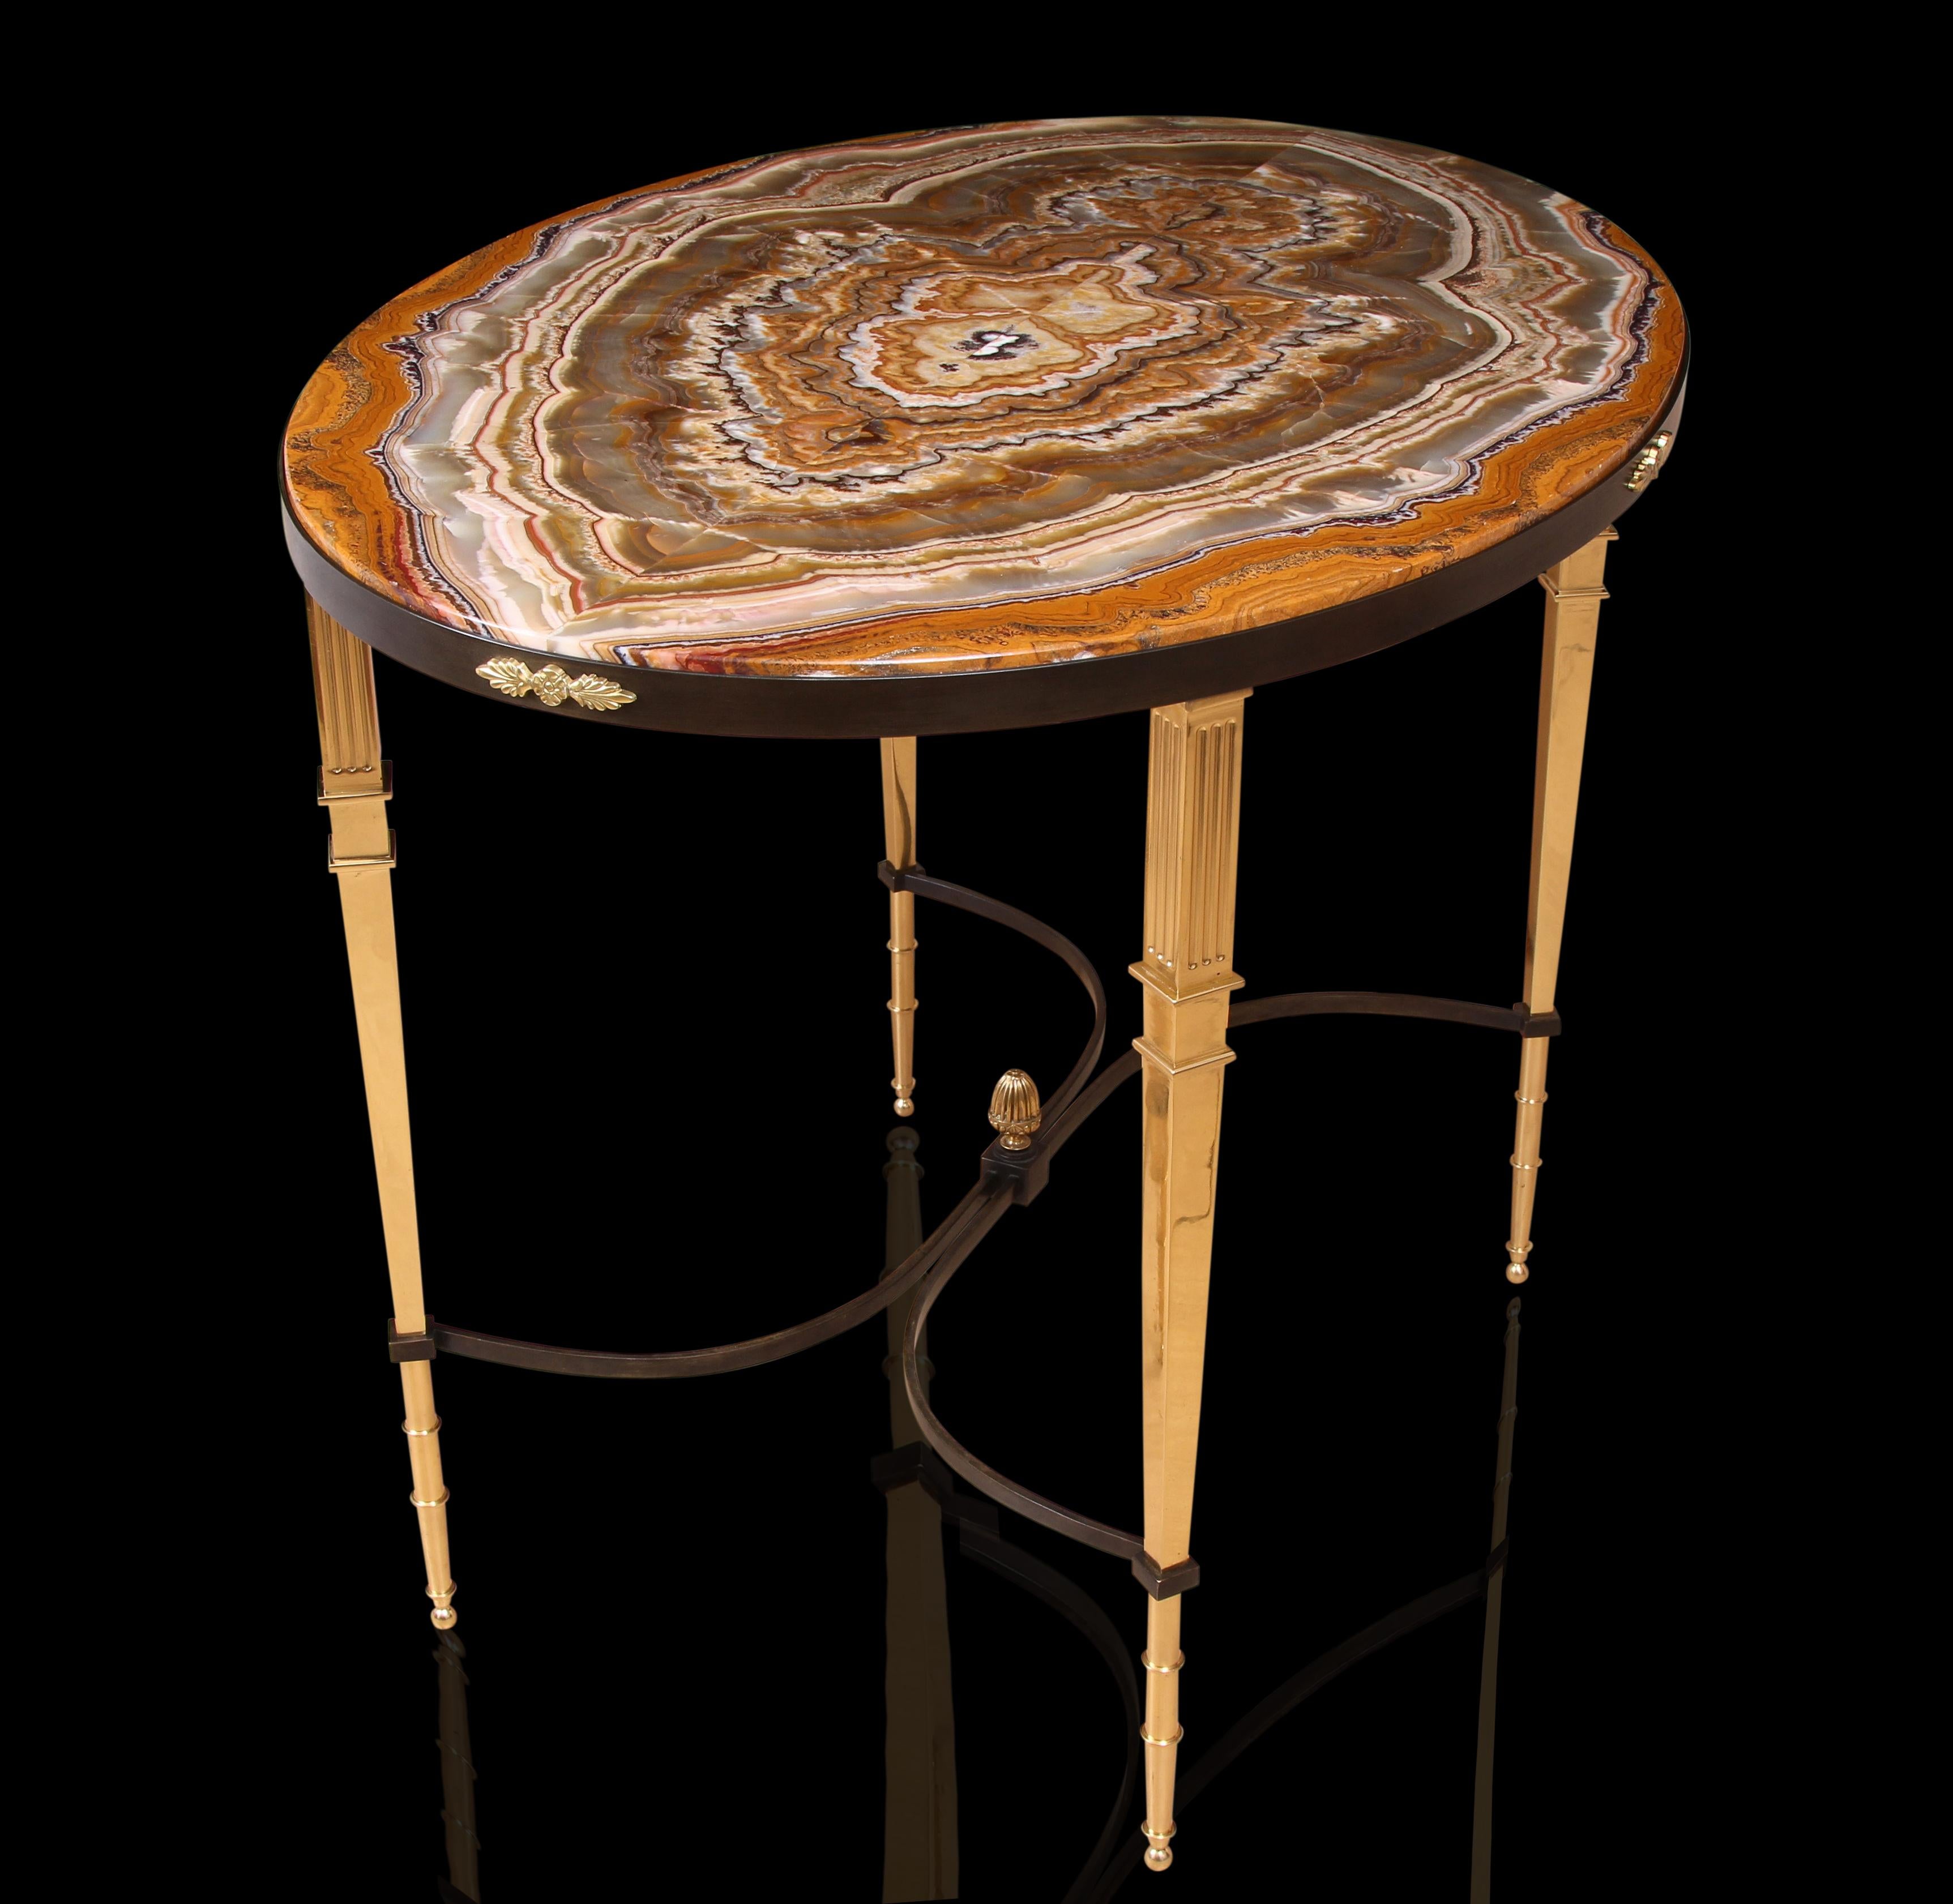 Art Deco Gilt & Patinated Bronze Alabastro Fiorito Onyx Marble Table In Good Condition For Sale In London, by appointment only